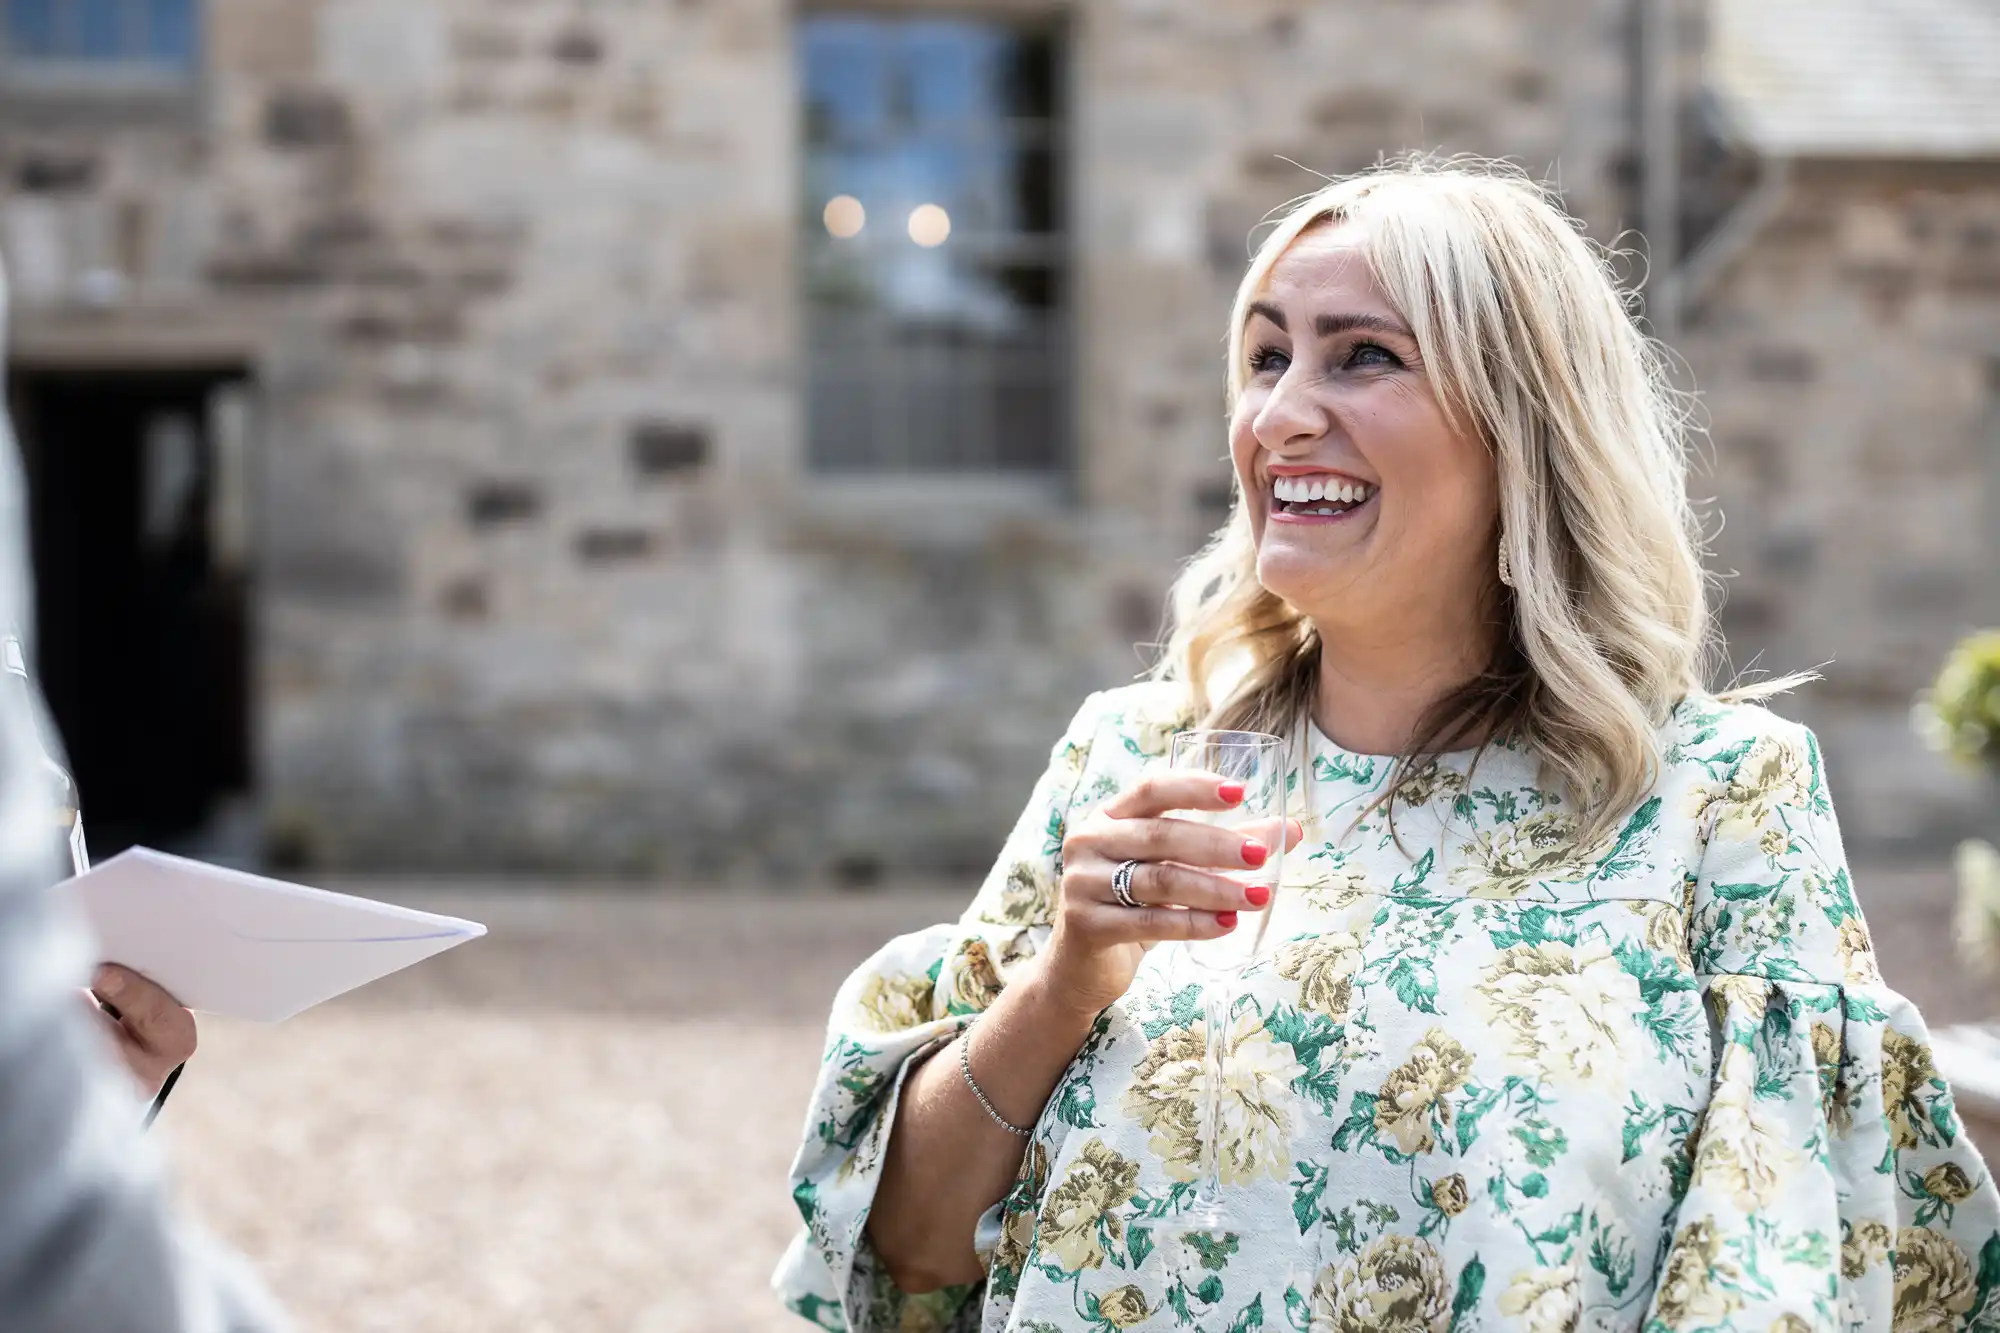 A woman in a floral dress laughs while holding a glass of wine at an outdoor event, with a historic stone building in the background.